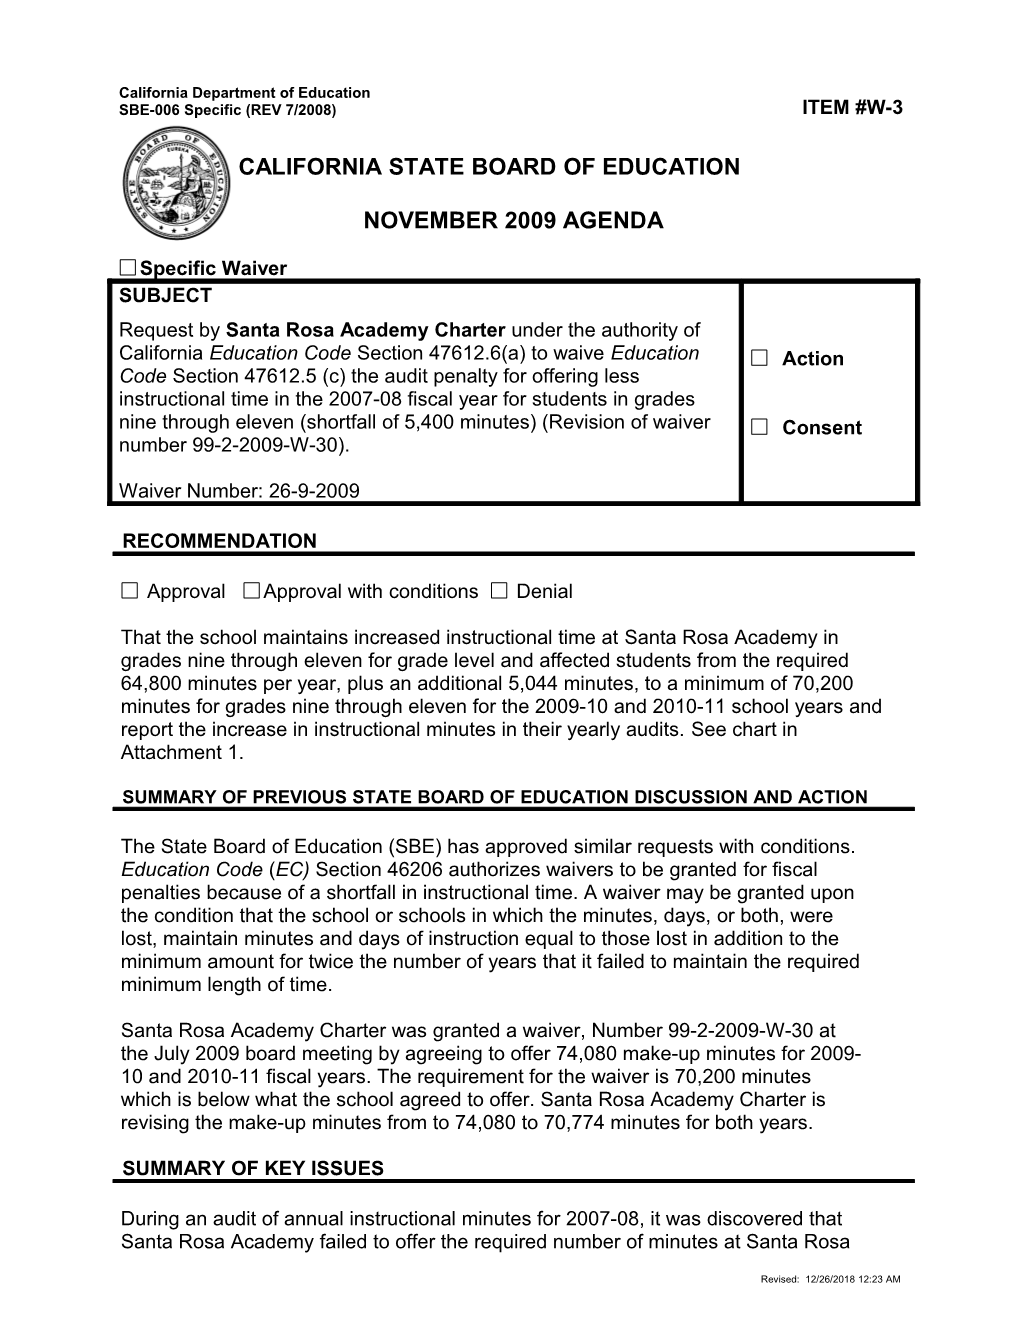 November 2009 Waiver Item W3 - Meeting Agendas (CA State Board of Education)